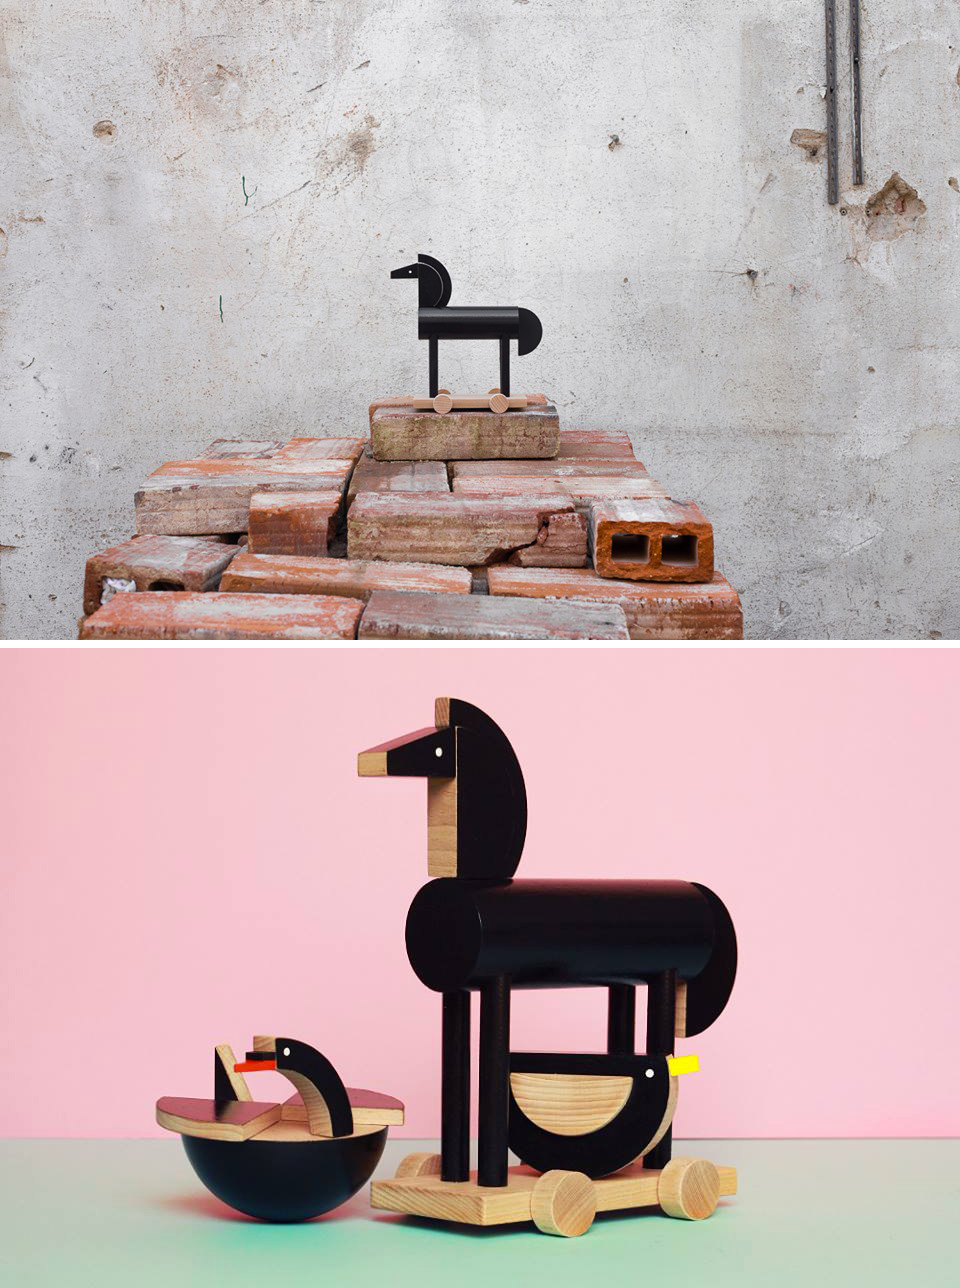 Ortus The Wooden Horse by Kutulu - Contemporary Czech Toy Design, Wooden animal toy